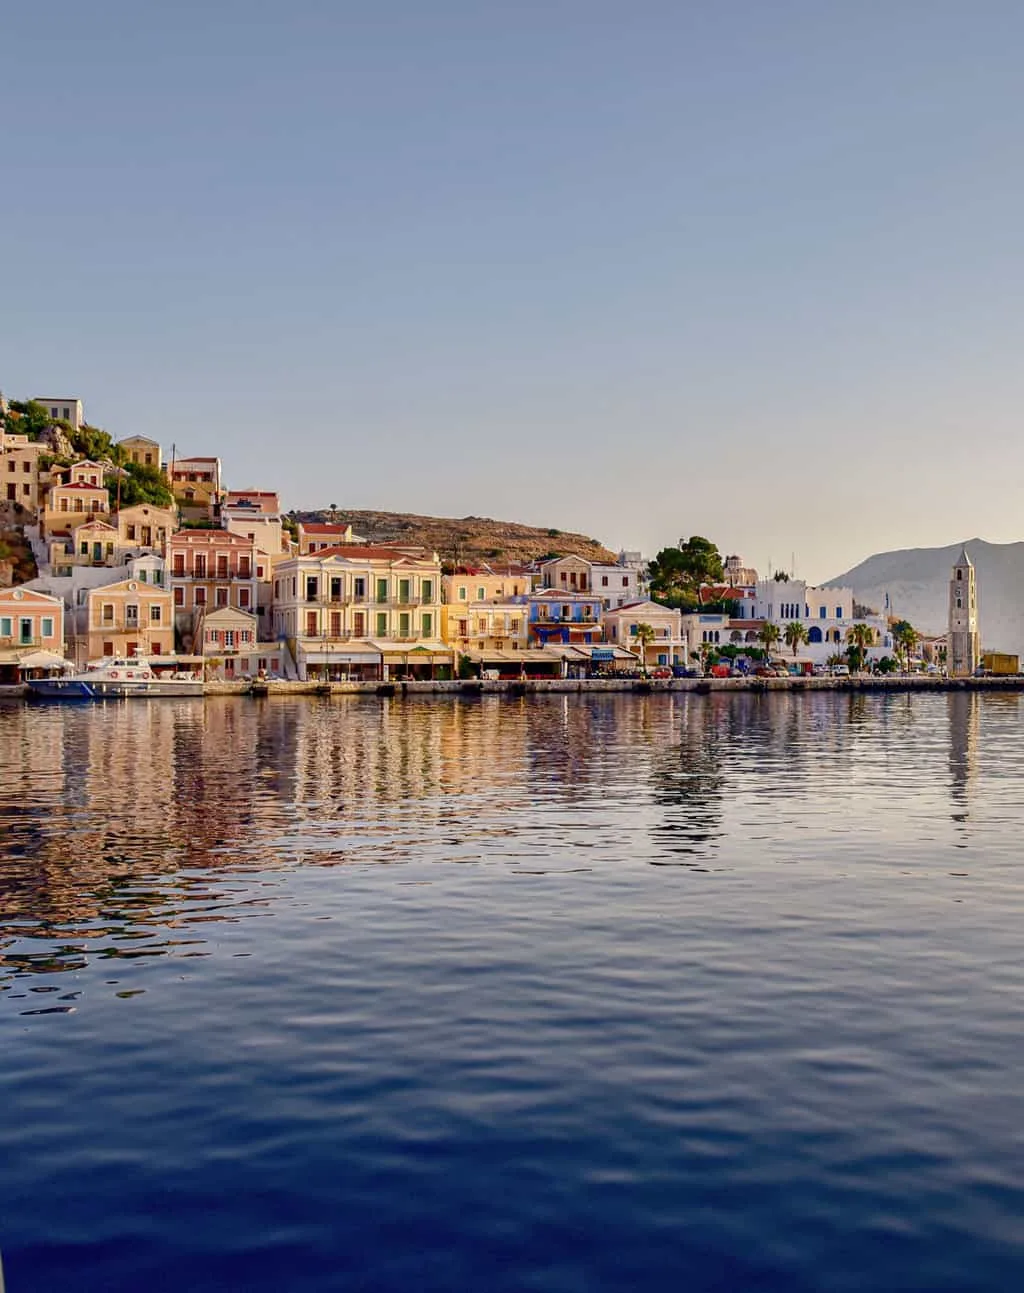 Colourful buldings climb the hill along the waterfront in the main town of Symi Island in Greece. The houses reflect in the water in the low light of dusk. 